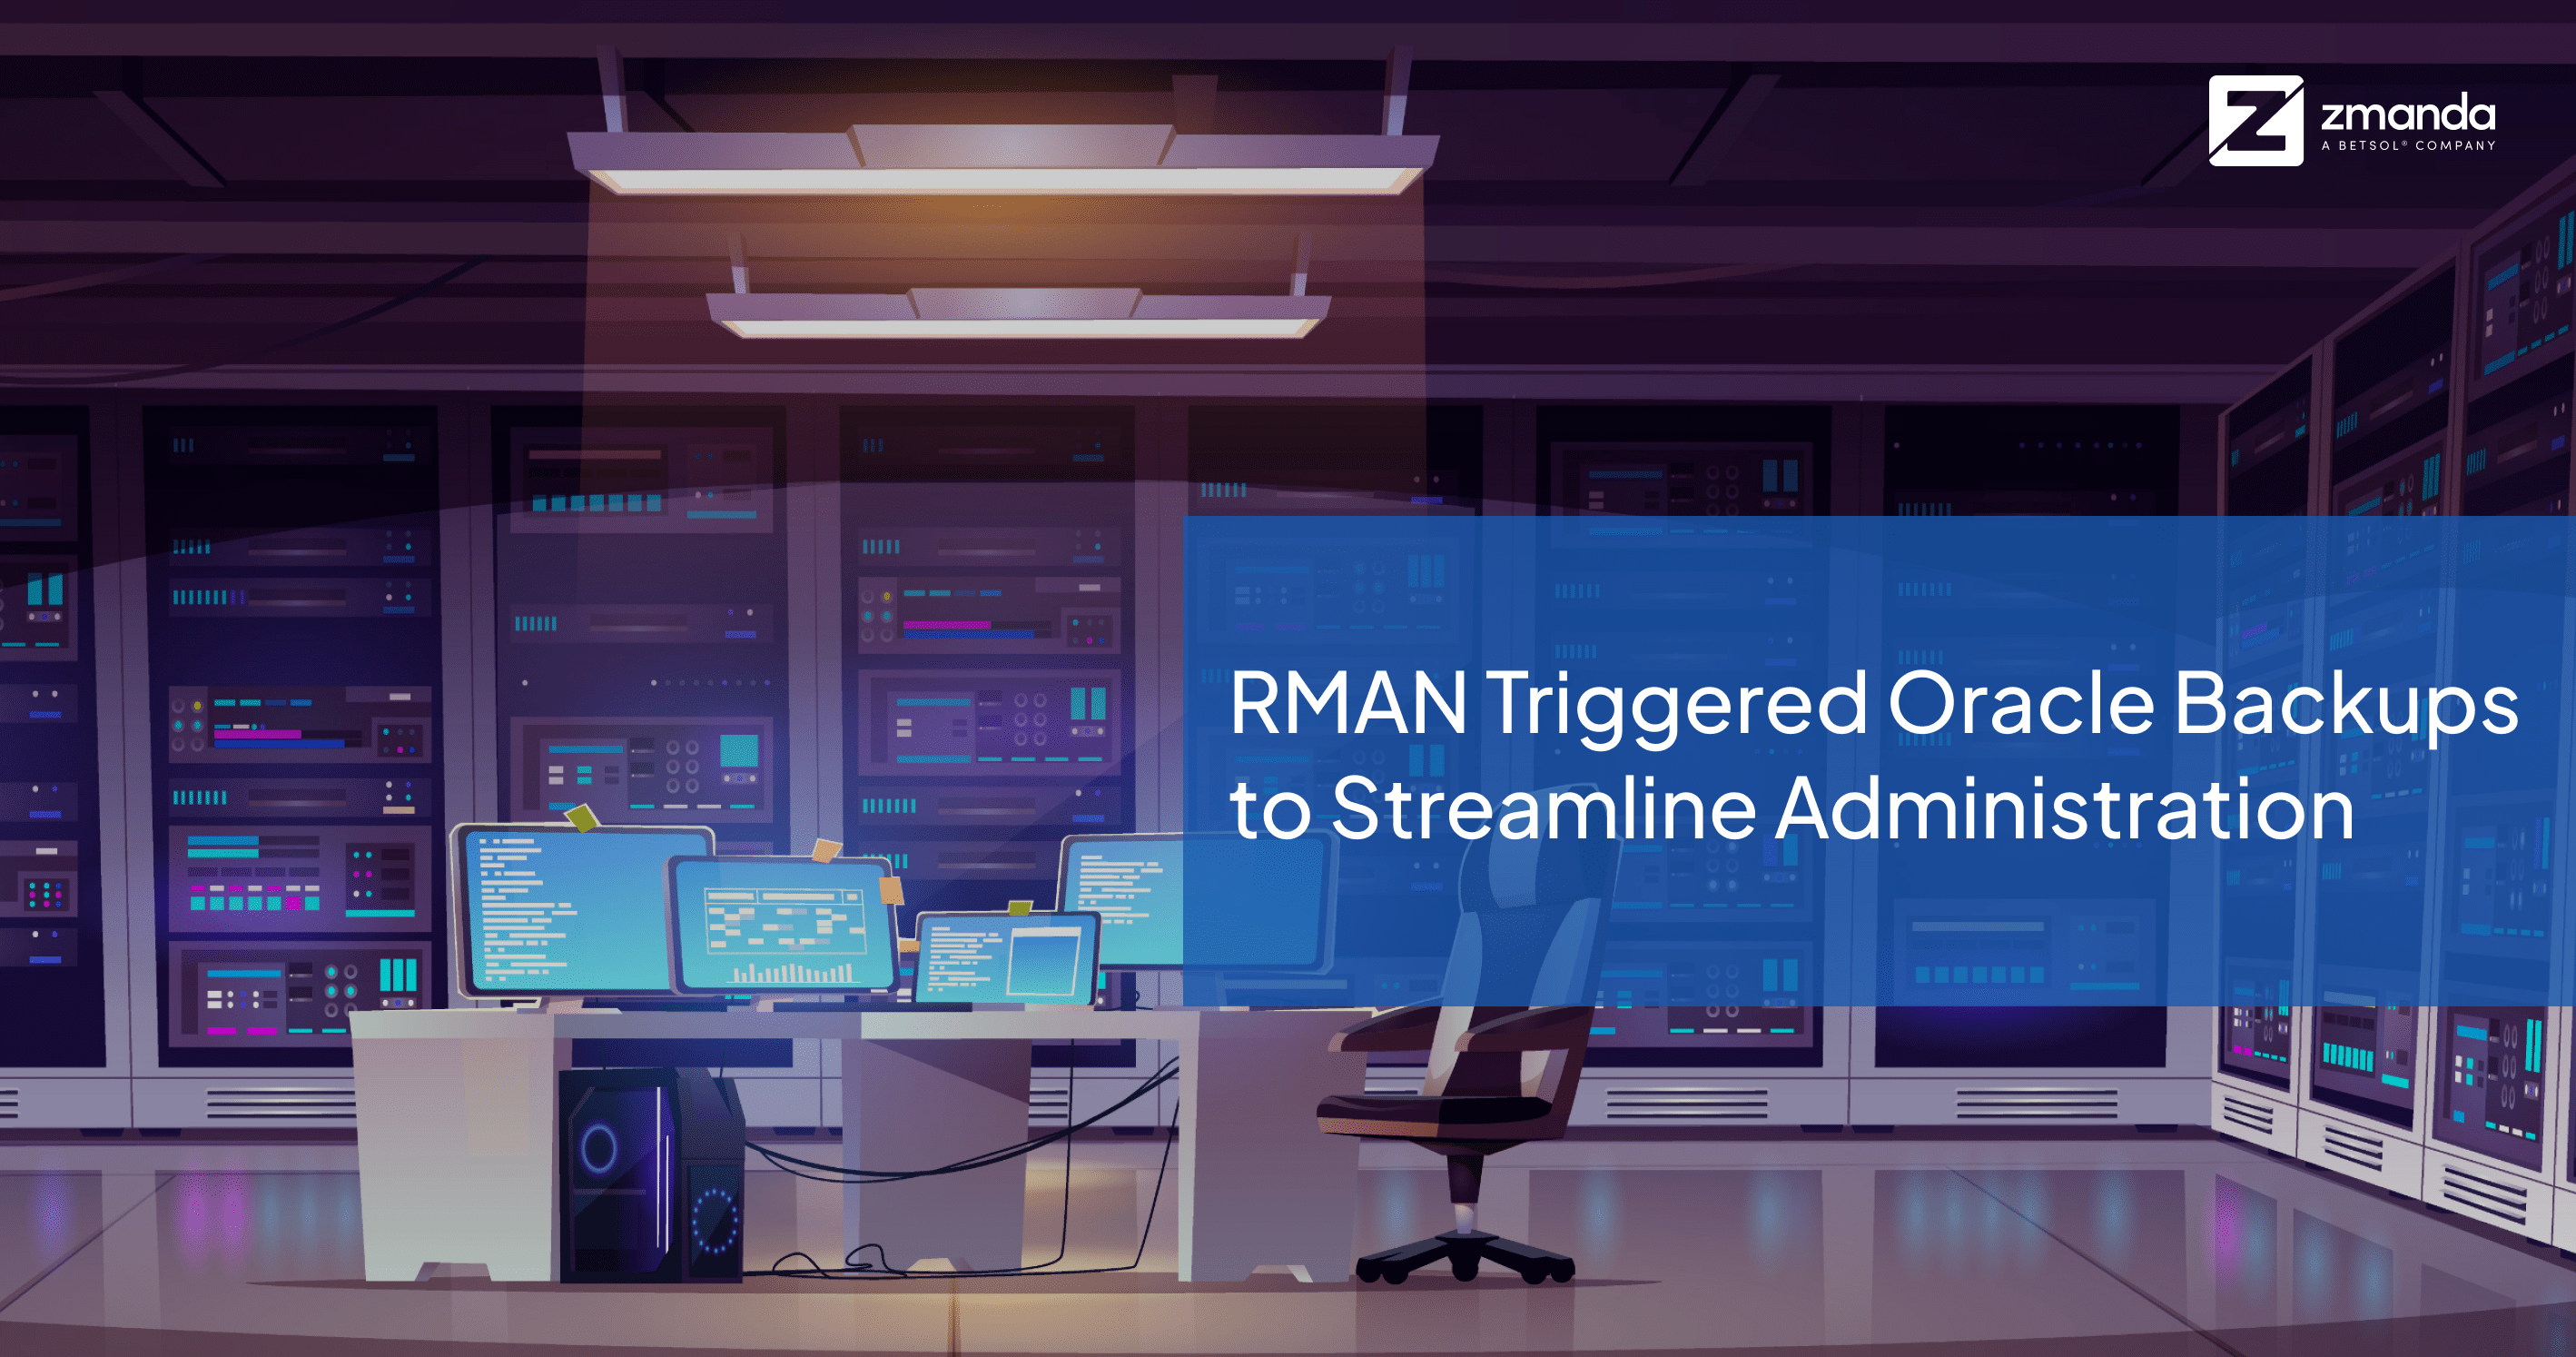 RMAN Triggered Oracle Backups to Streamline Administration